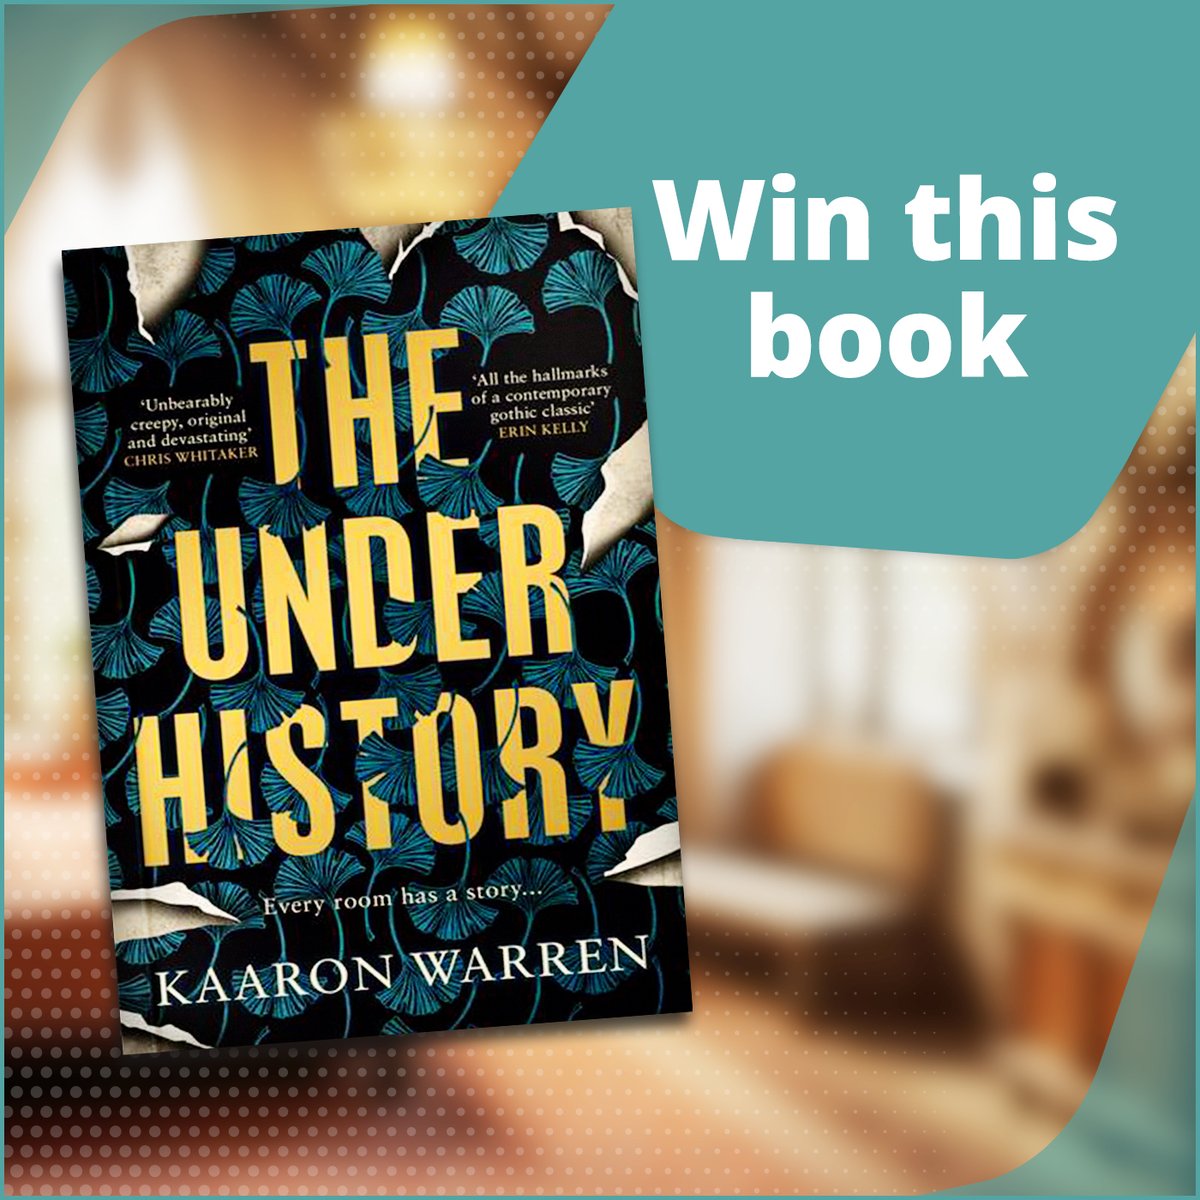 WIN THIS BOOK – This week, we’re giving away three copies of The Underhistory by Kaaron Warren, author of the novels Slights, Walking the Tree, Mistification, Tide of Stone and The Grief Hole. To win, enter here: writerscentre.com.au/win